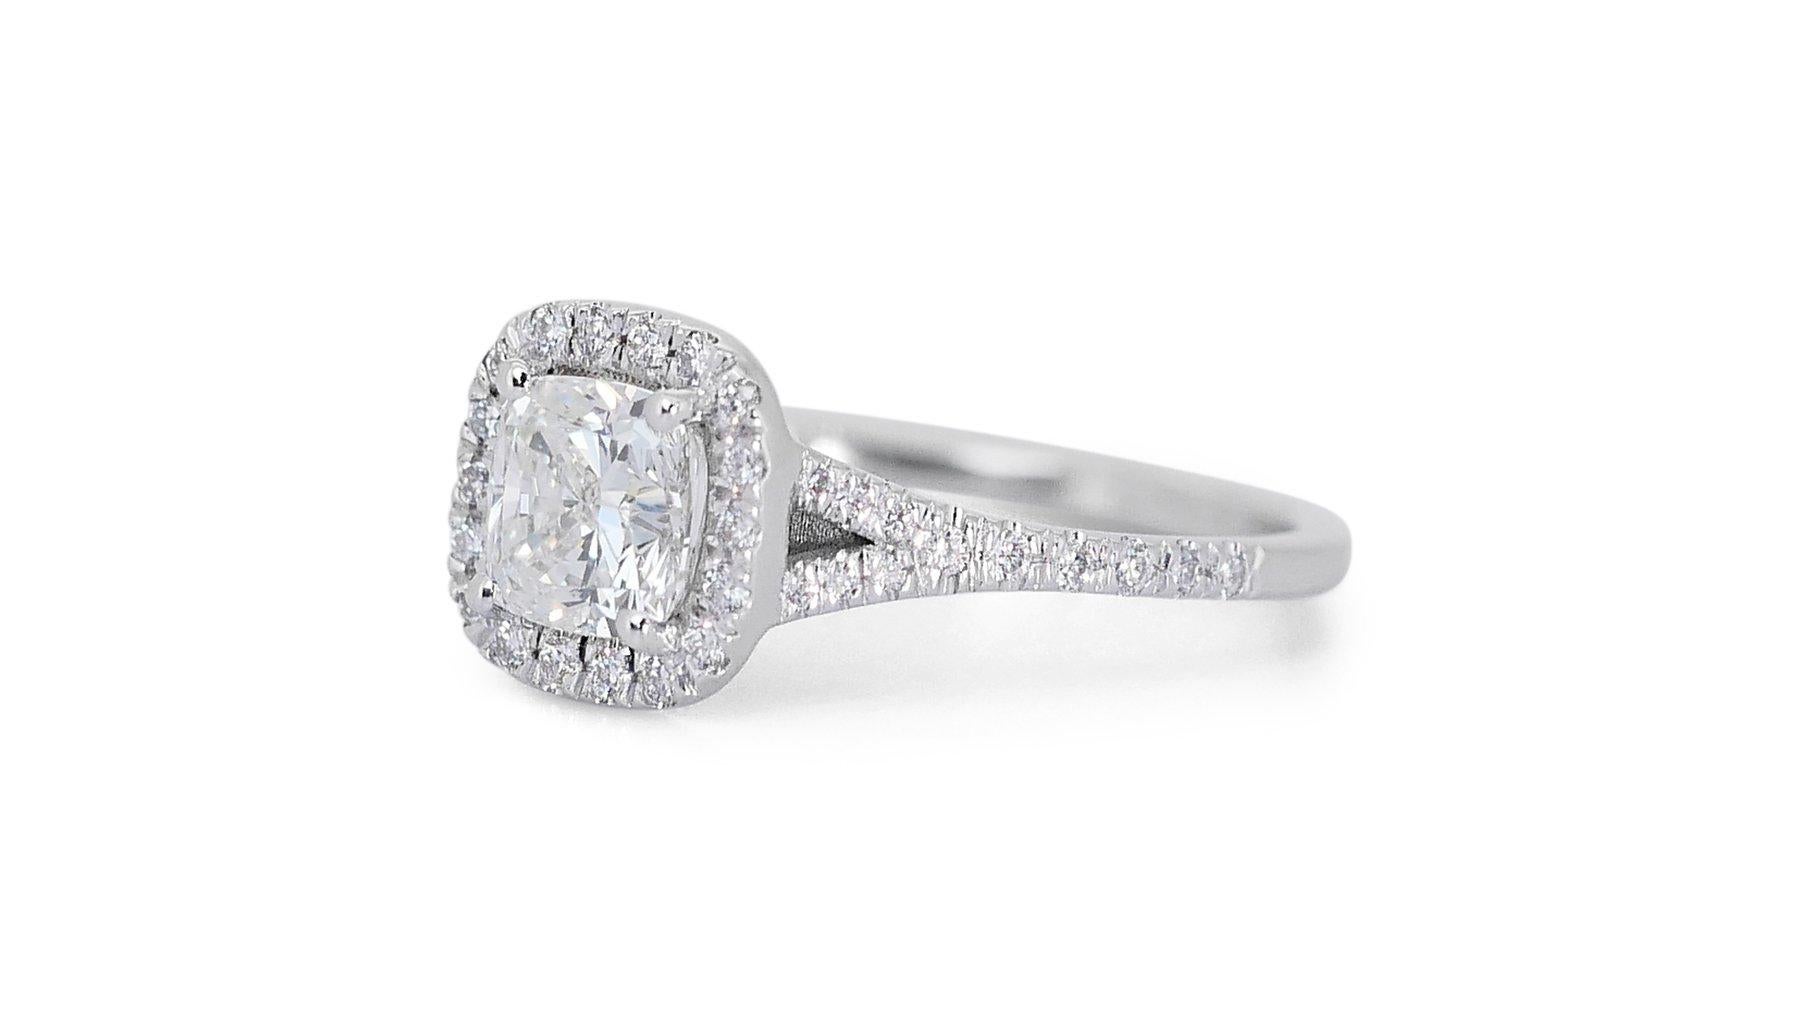 Adorn yourself with timeless beauty and sophistication with this Ideal 1.24ct halo natural diamond ring, a testament to luxury and refinement. Crafted with finesse and elegance, this stunning piece comes with a GIA Certification for its authenticity